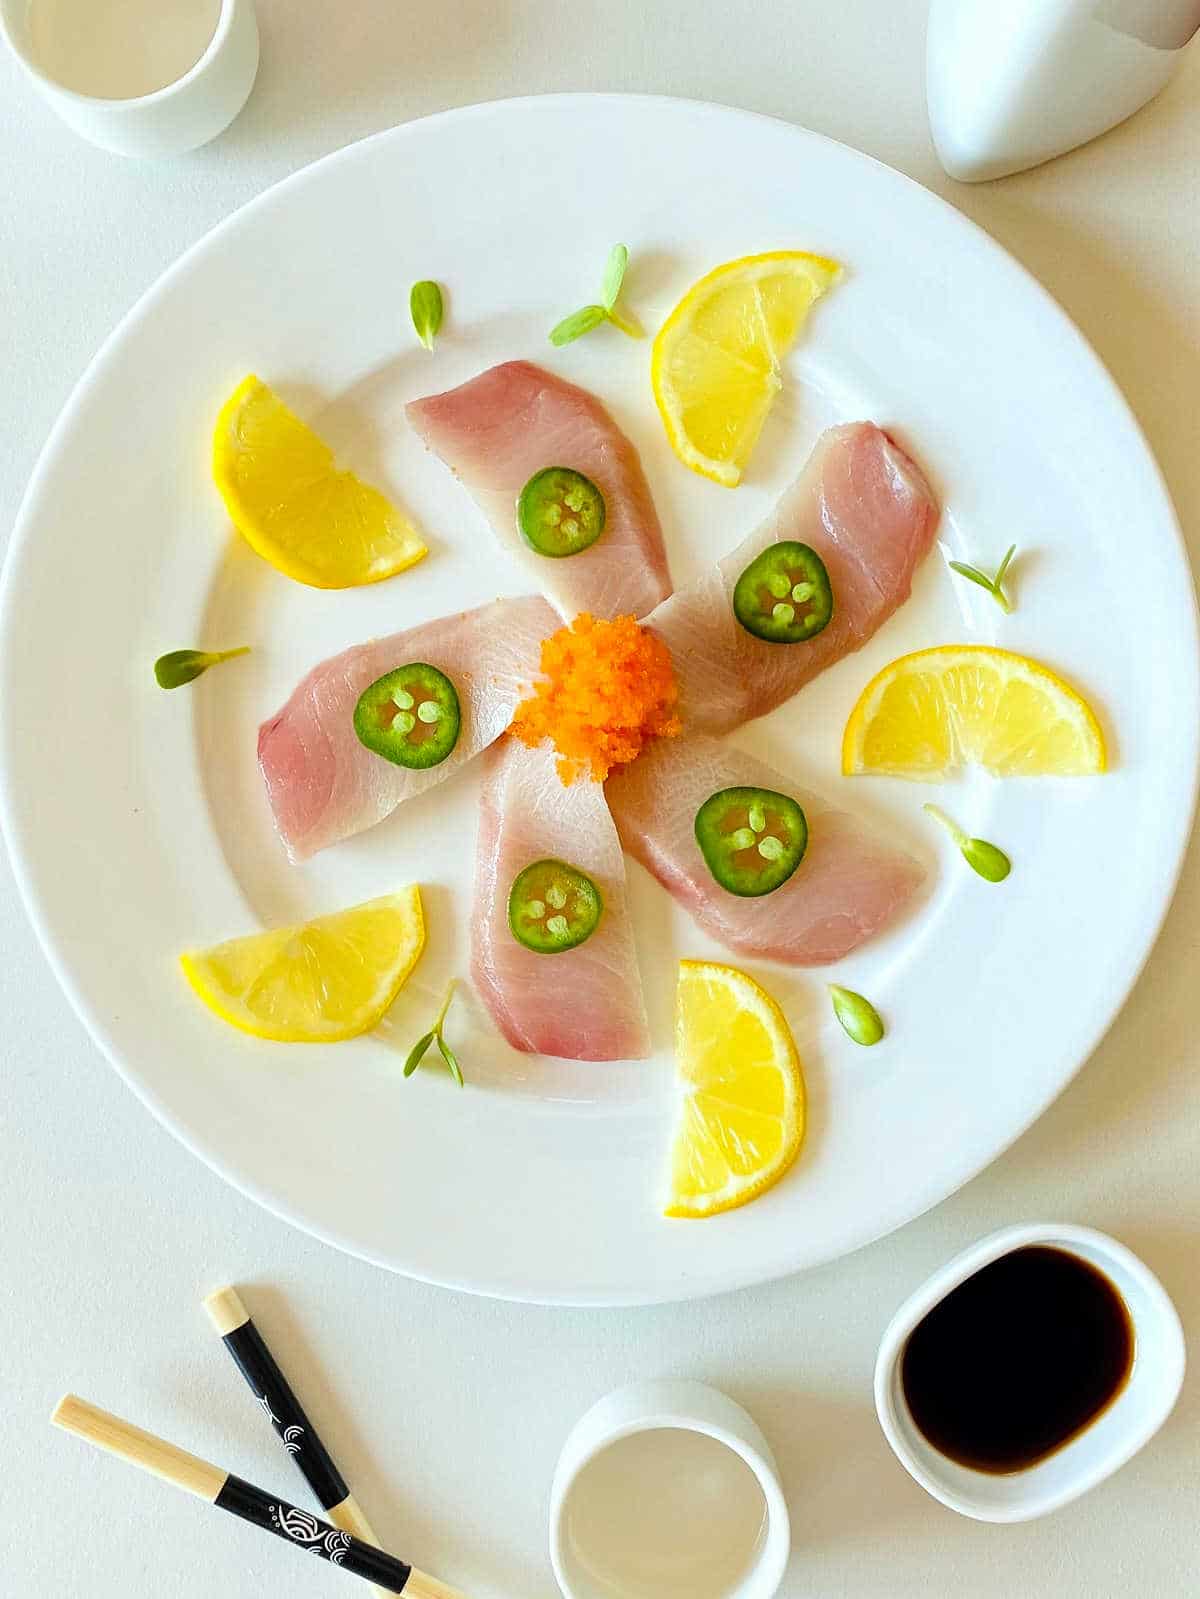 yellowtail sashimi slices on white plate topped with jalapeno slices and surrounded by lemon slices, soy sauce and chopsticks